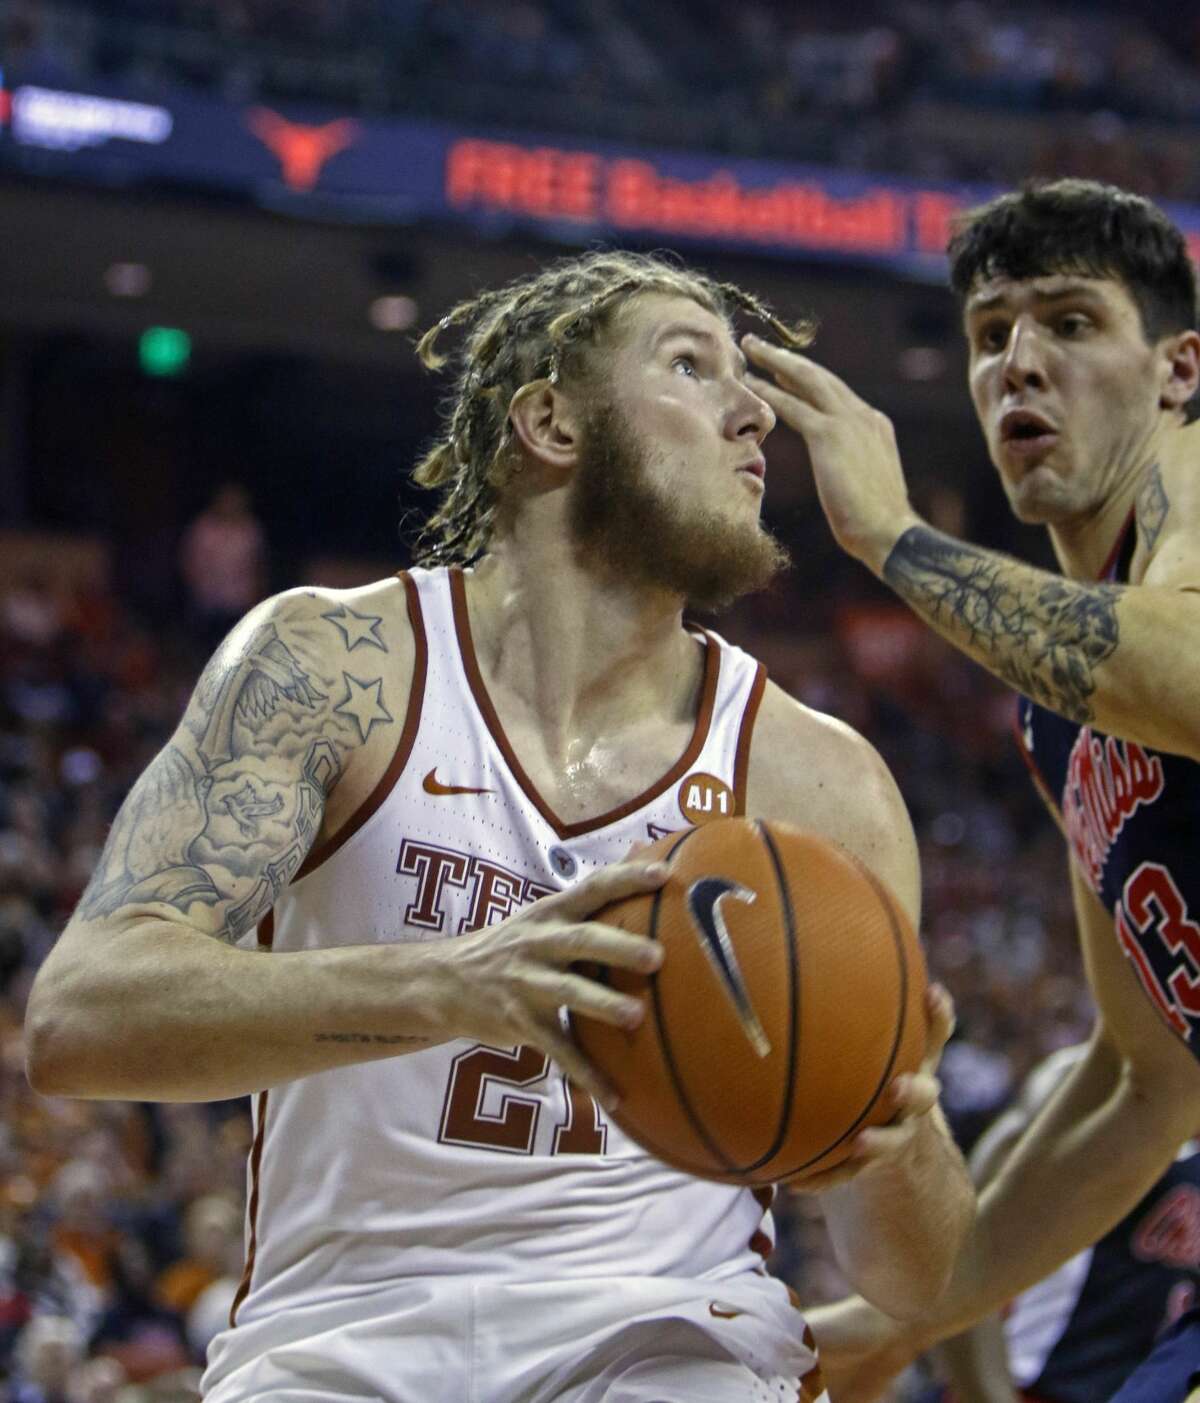 Texas forward Dylan Osetkowski, left, looks to shoot against Mississippi center Justas Furmanavicius, right, during the second half of an NCAA college basketball game, Saturday, Jan. 27, 2018, in Austin, Texas. Texas won 85-72. (AP Photo/Michael Thomas)